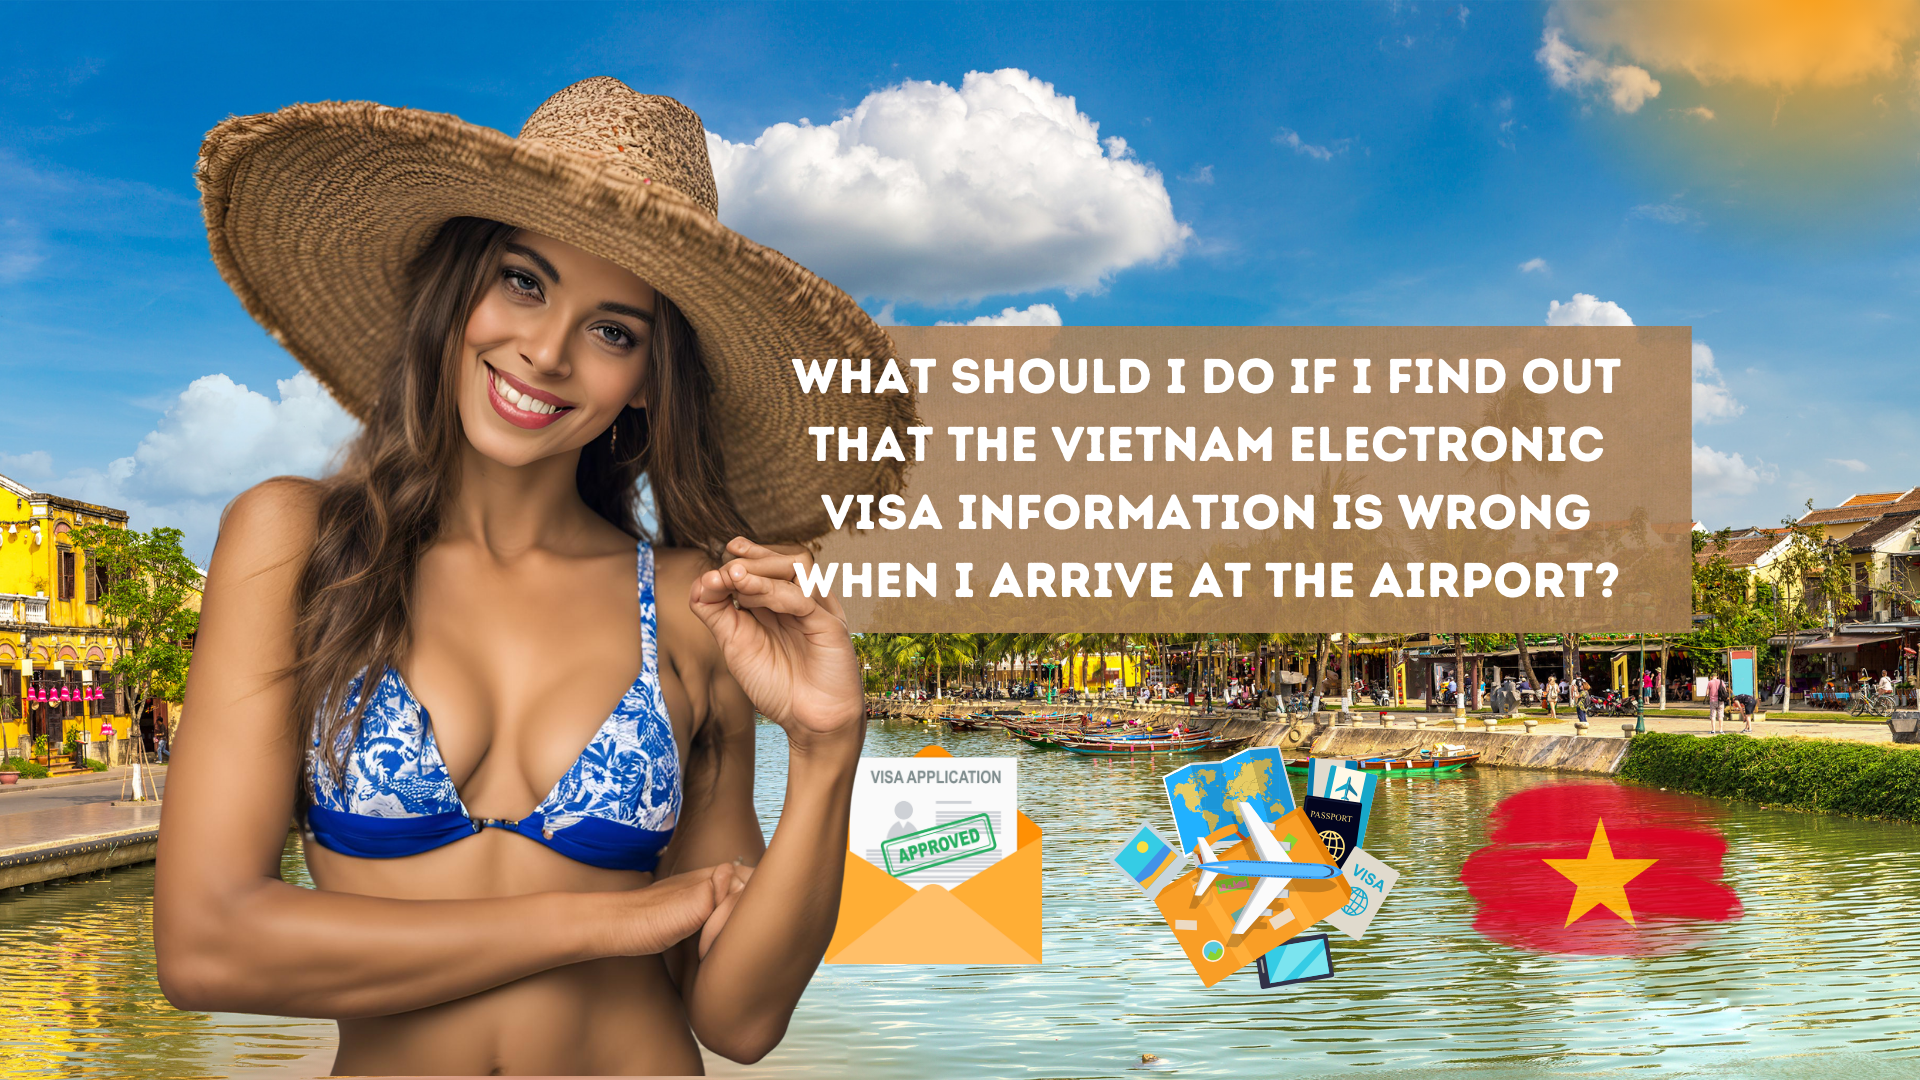 What should I do if I find out that the Vietnam electronic visa information is wrong when I arrive at the airport?